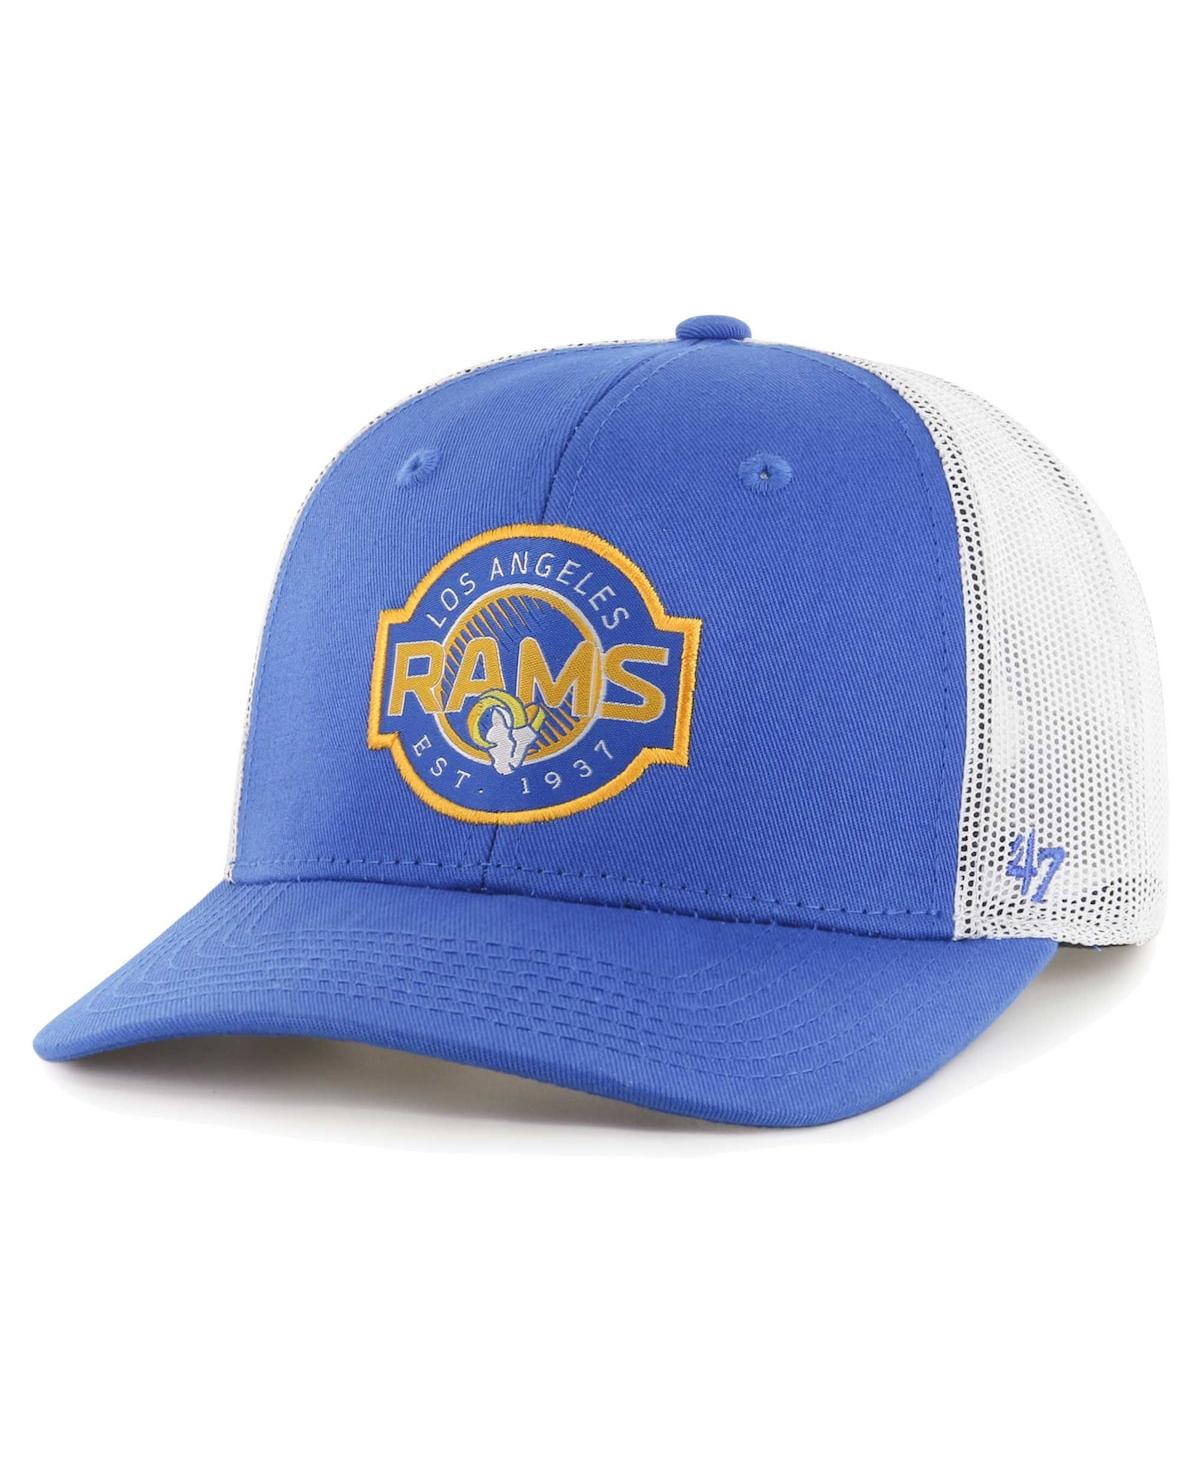 47 Brand Youth Boys And Girls ' Royal, White Los Angeles Rams Scramble Adjustable Trucker Hat In Royal,white